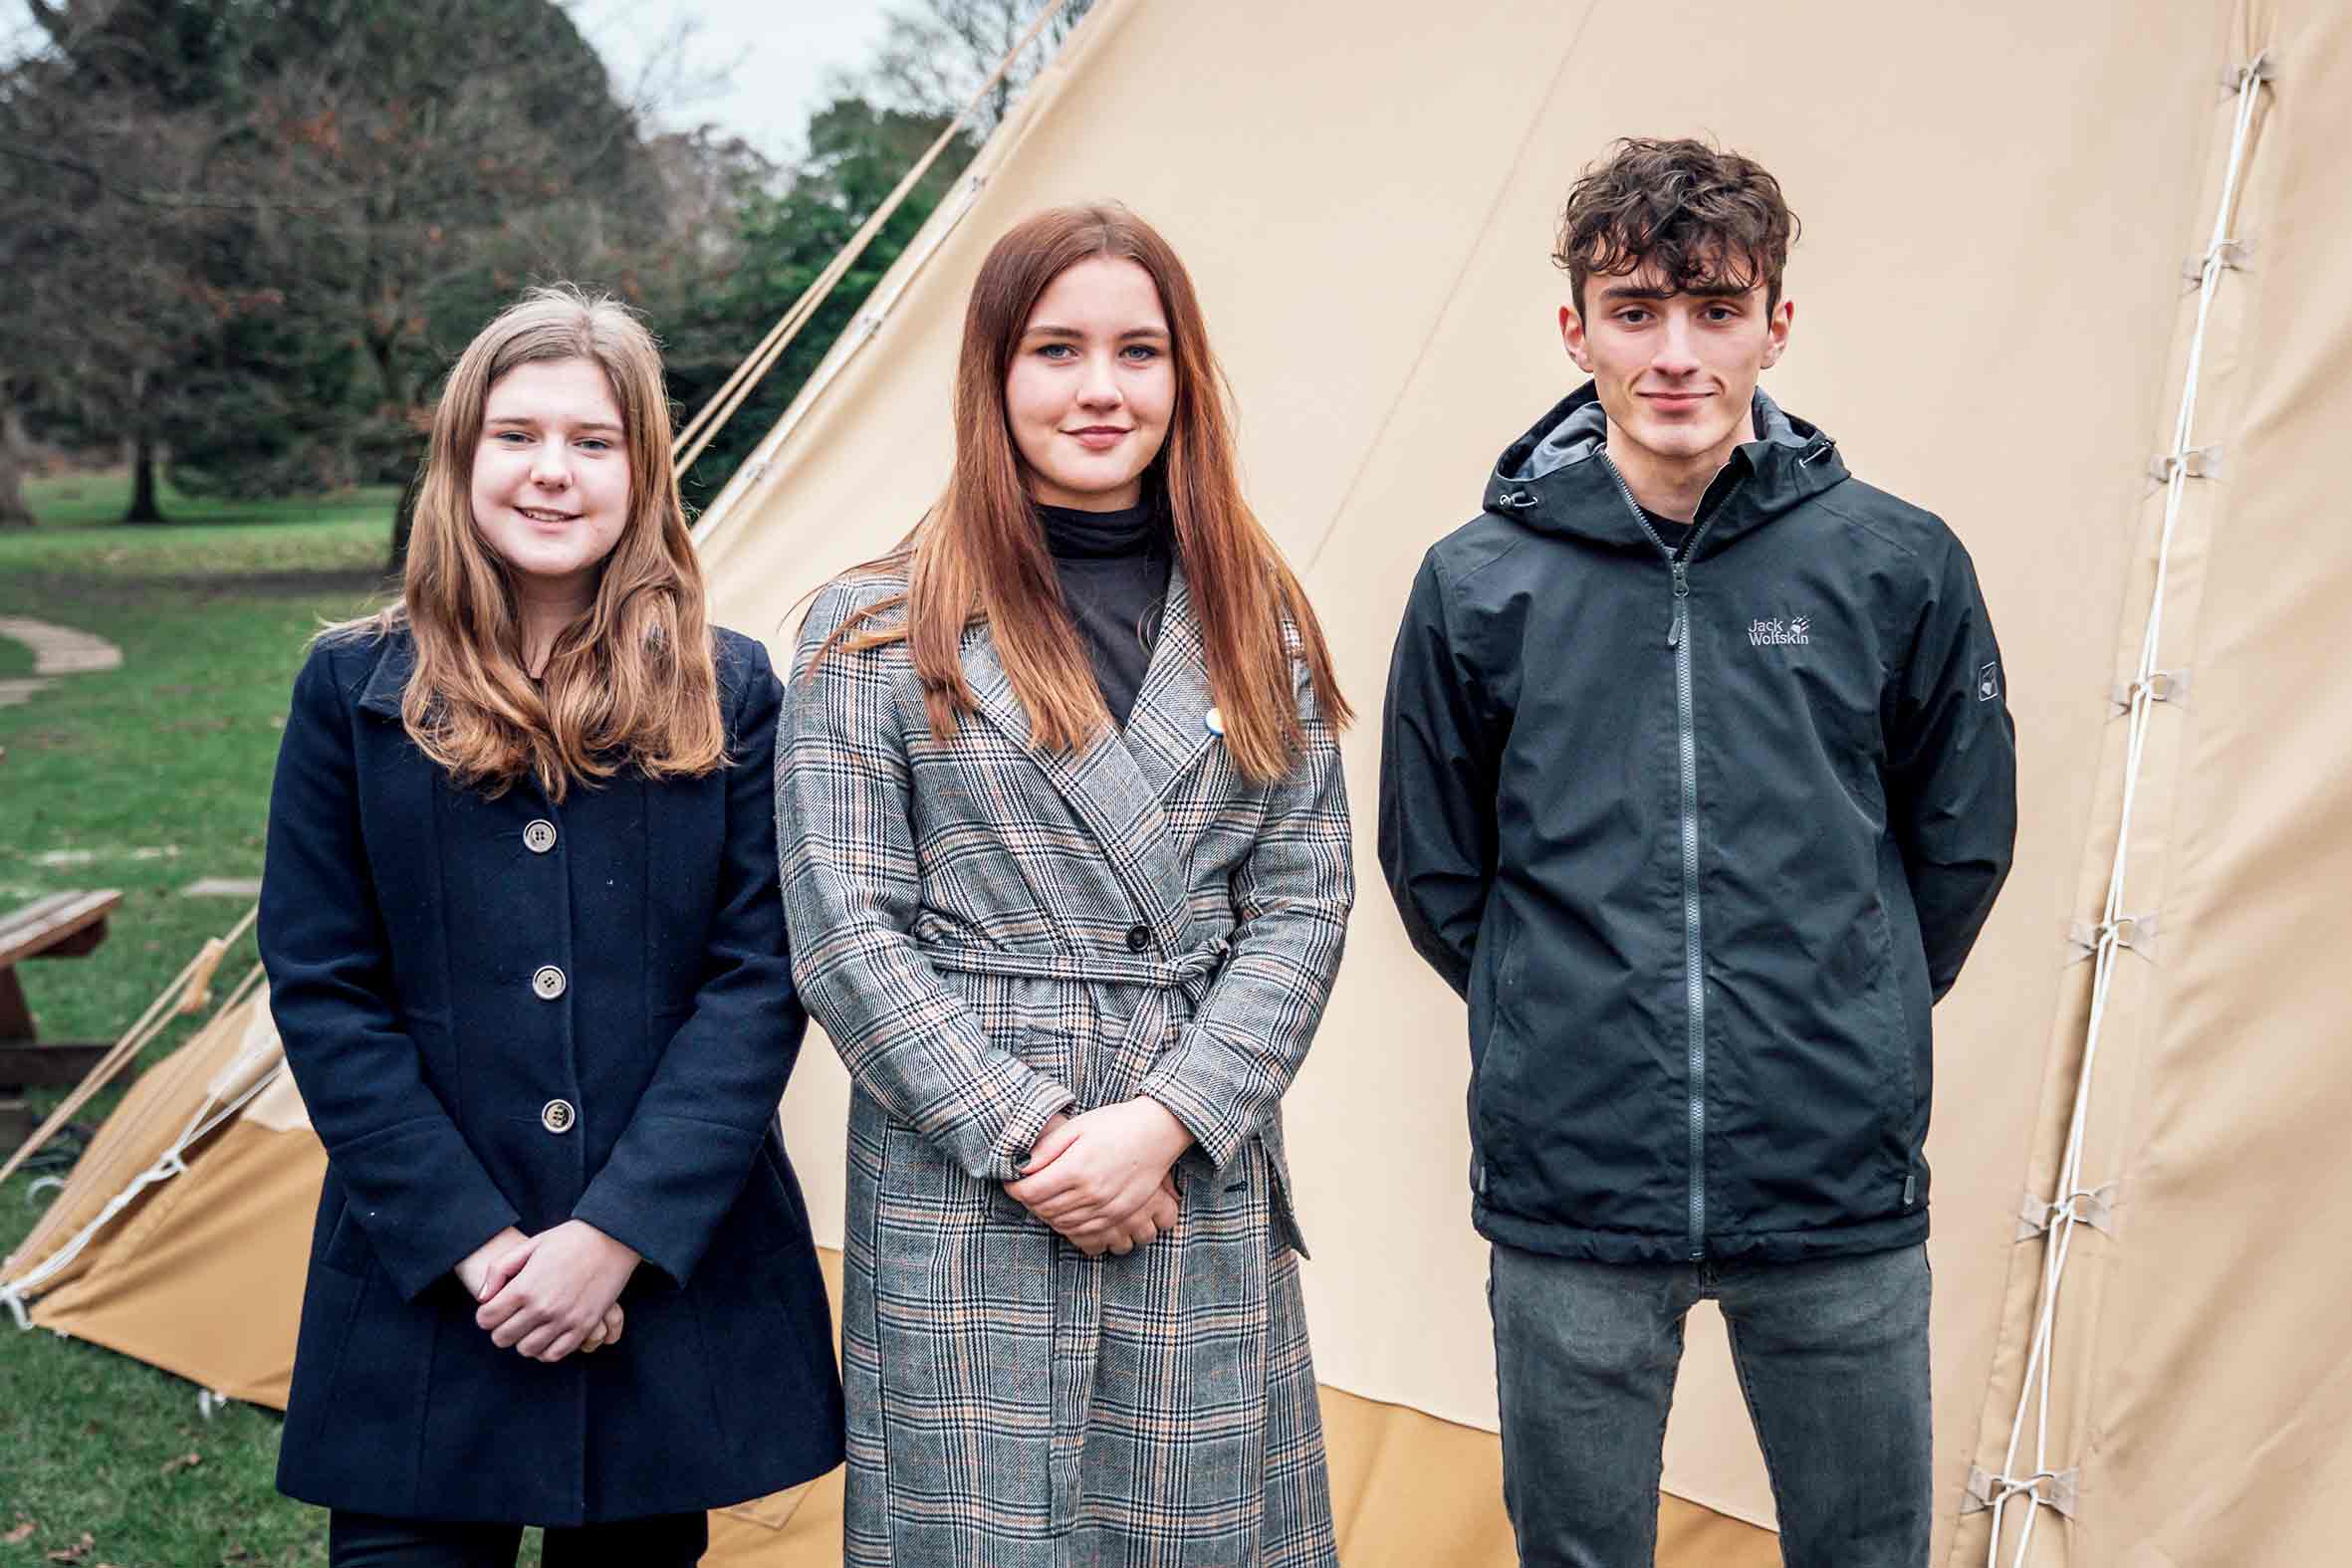 North Yorkshire’s new Members of the UK Youth Parliament. From left, Molly Richardson, Rebecca Morgan and Torin Zeiboll